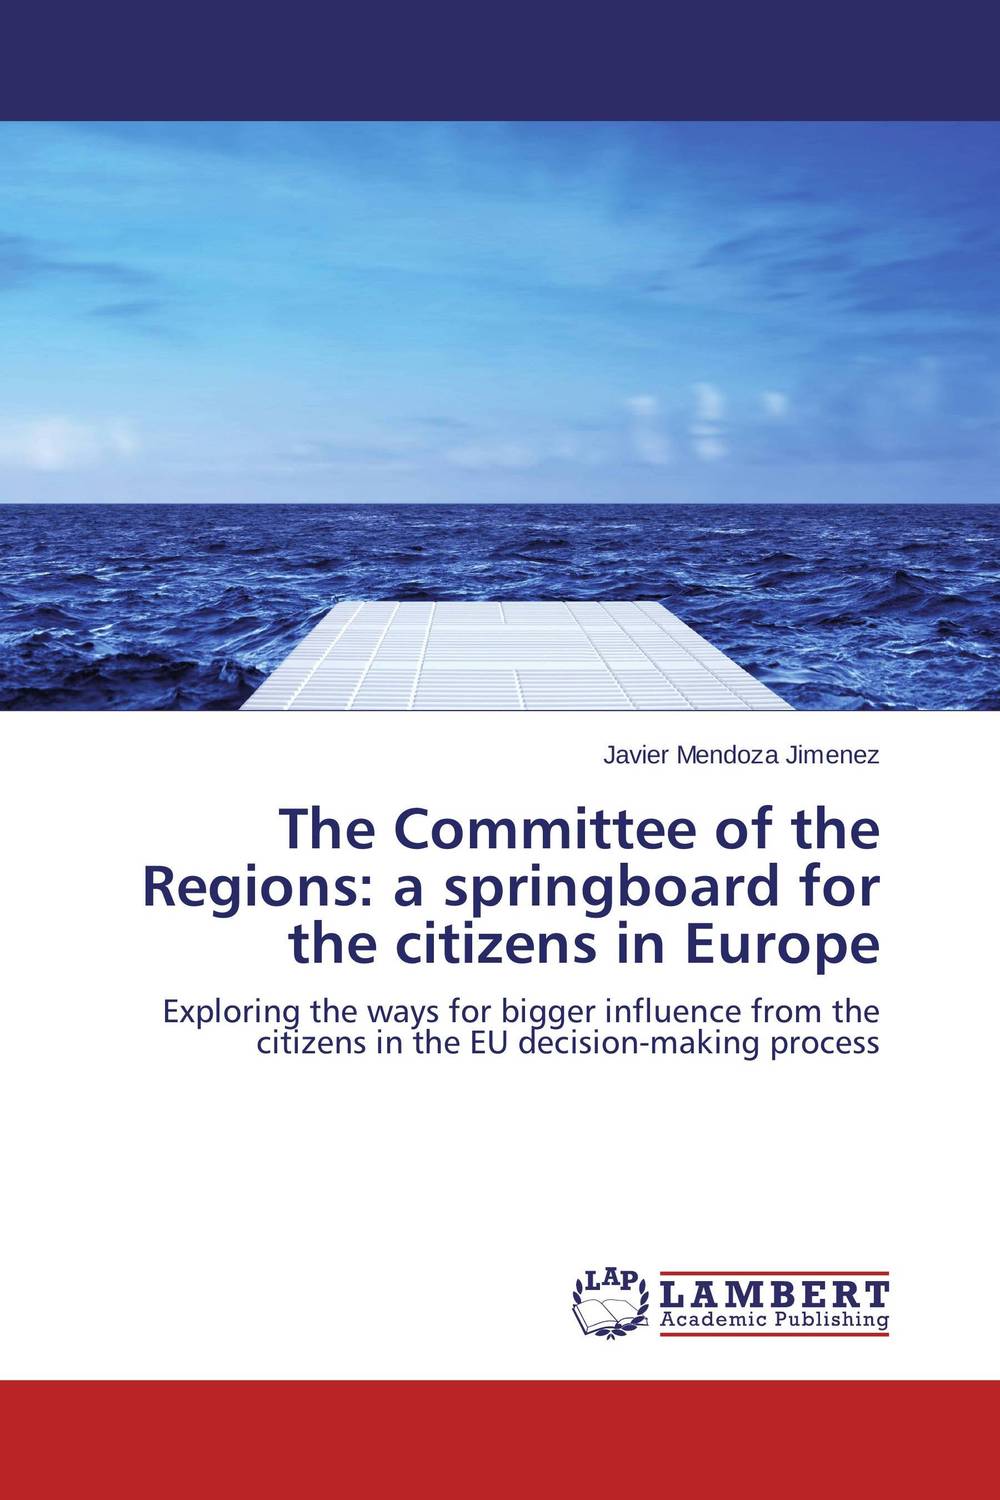 The Committee of the Regions: a springboard for the citizens in Europe